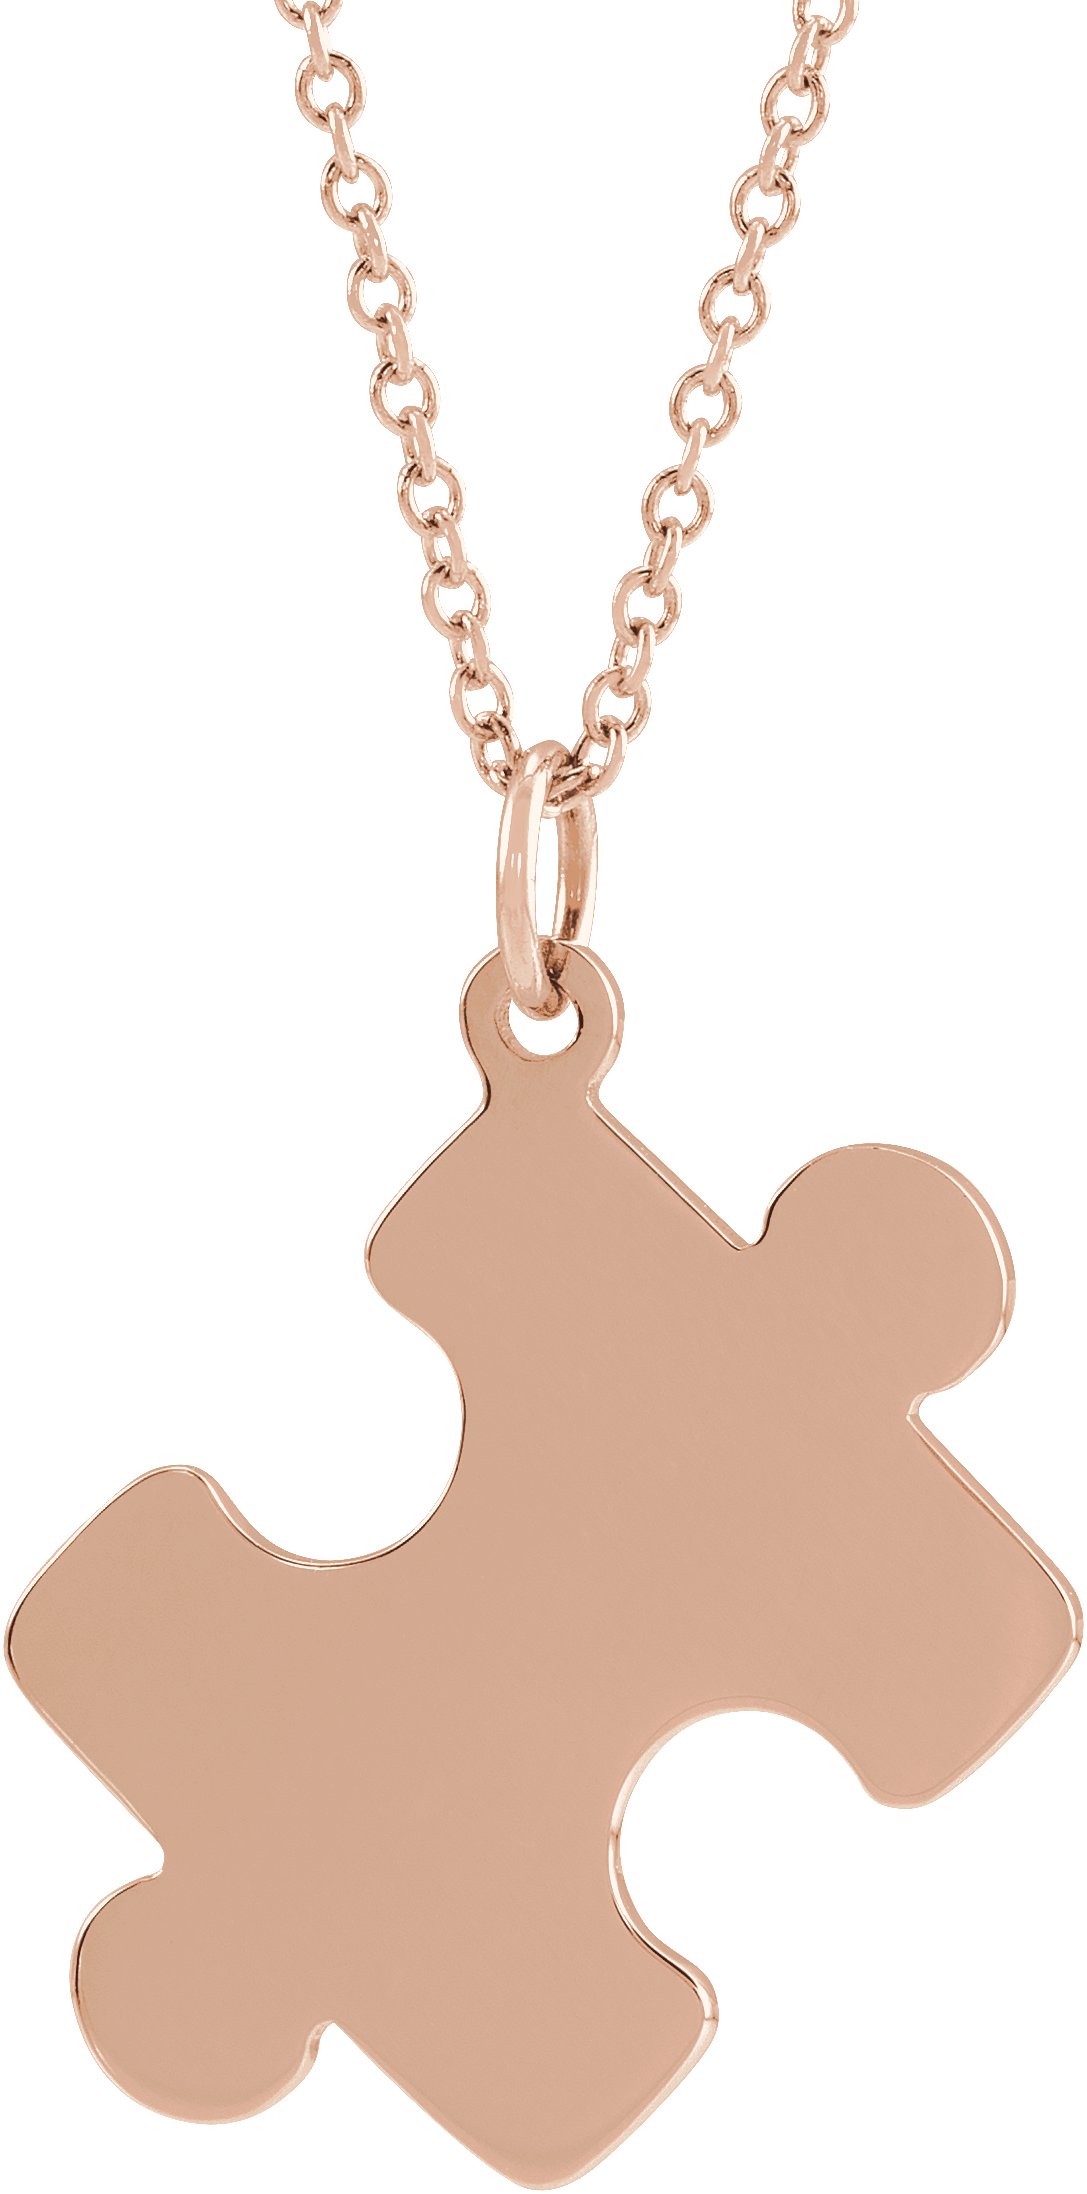 18K Rose Gold Plated Sterling Silver 15.65x12 mm Puzzle Piece 16 18 inch Necklace Ref. 17554092